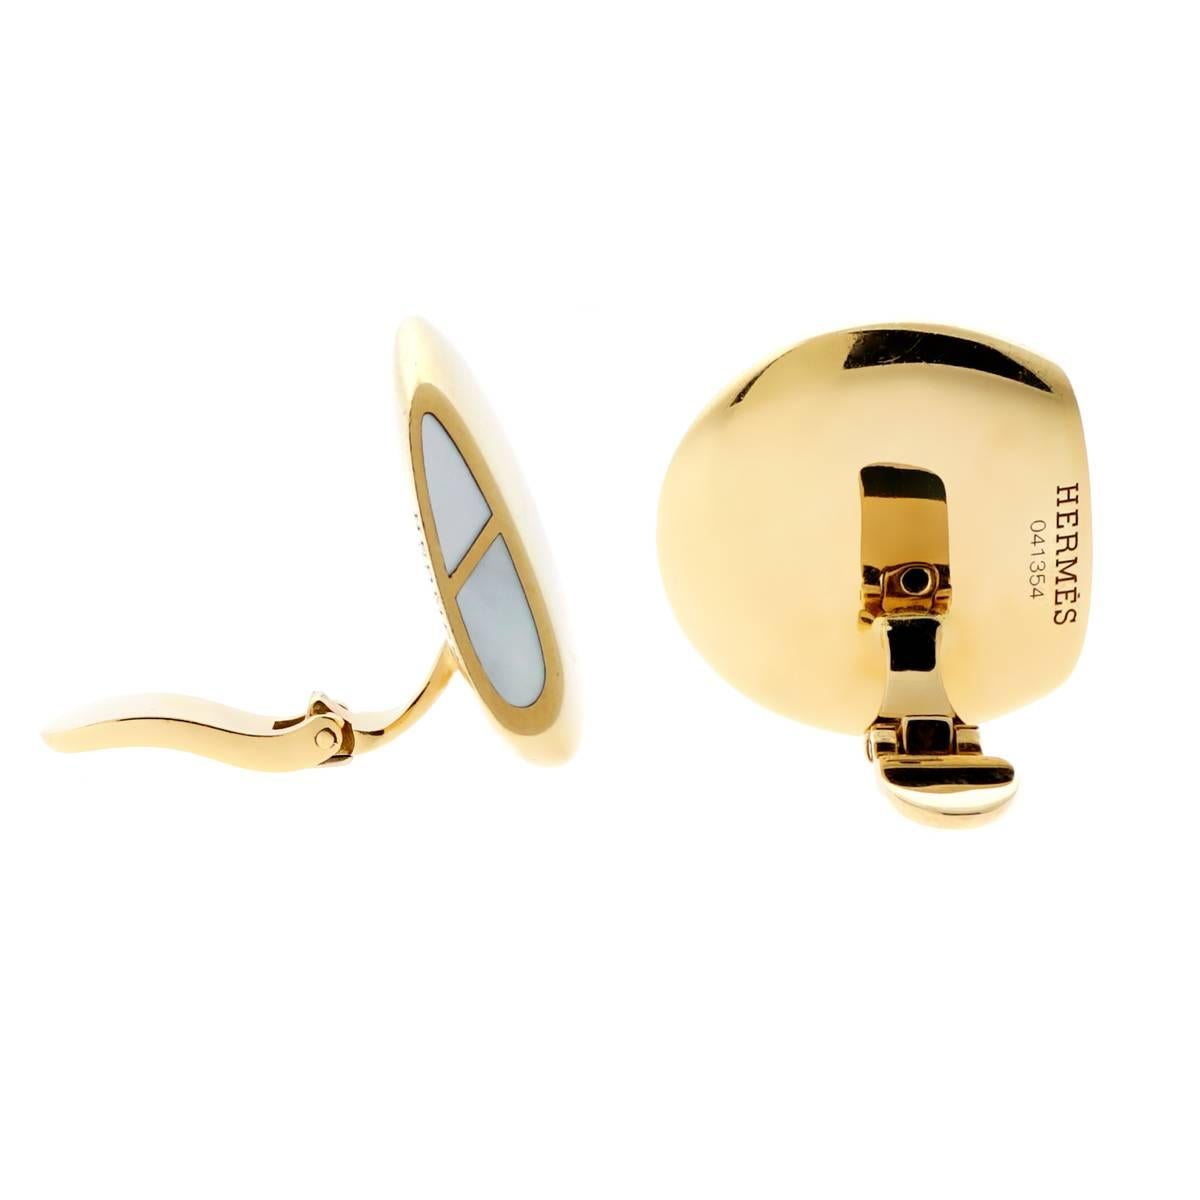 A fabulous pair of Hermes earrings featuring inlaid mother of pearl within a link motif in 18k yellow gold.

